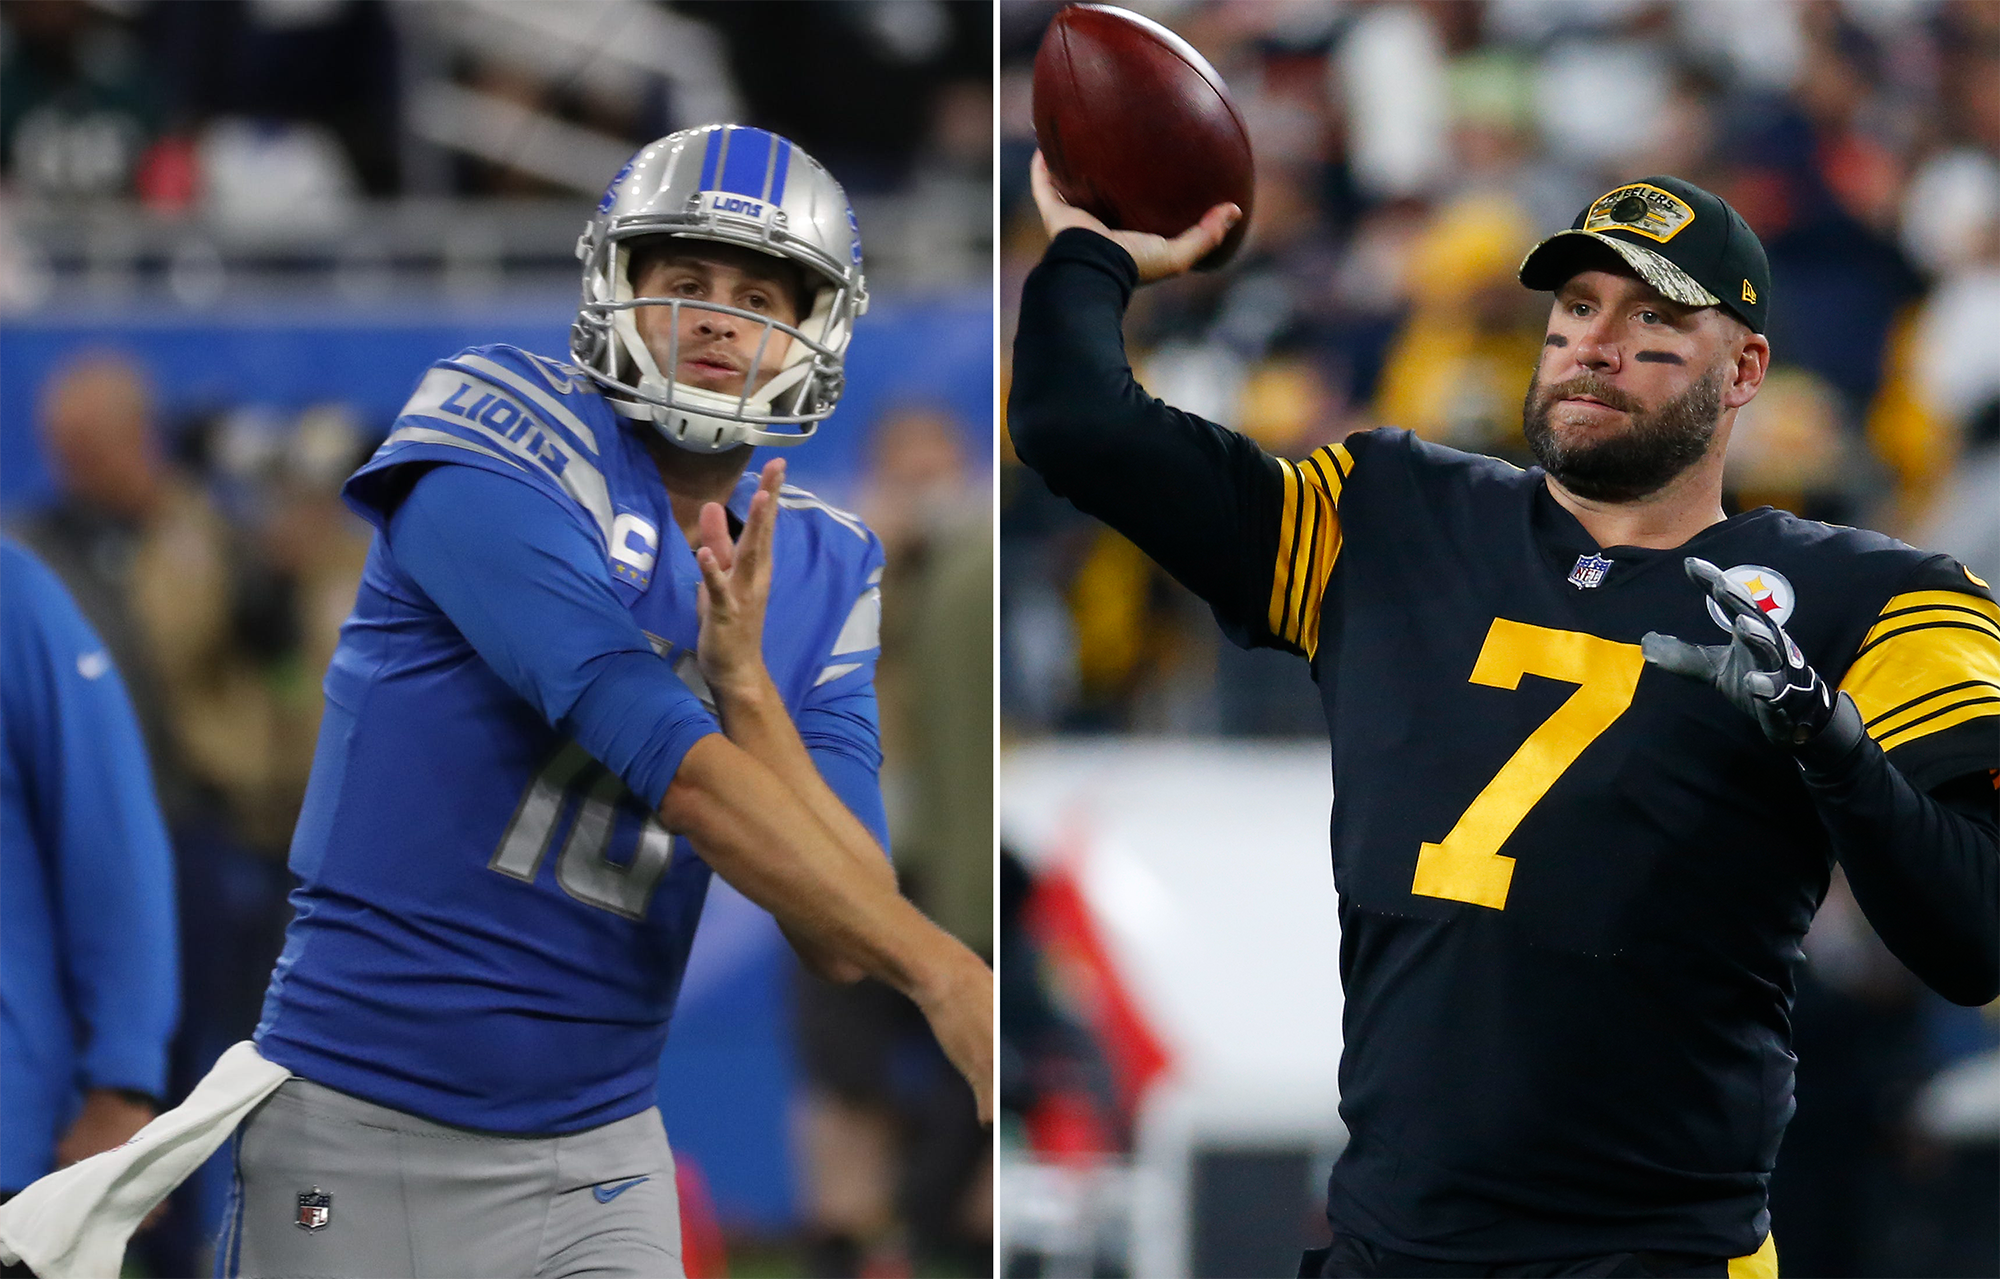 Jared Goff (left) and the Lions should be able to stay close with Ben Roethlisberger (right) and the Steelers' lowly offense.